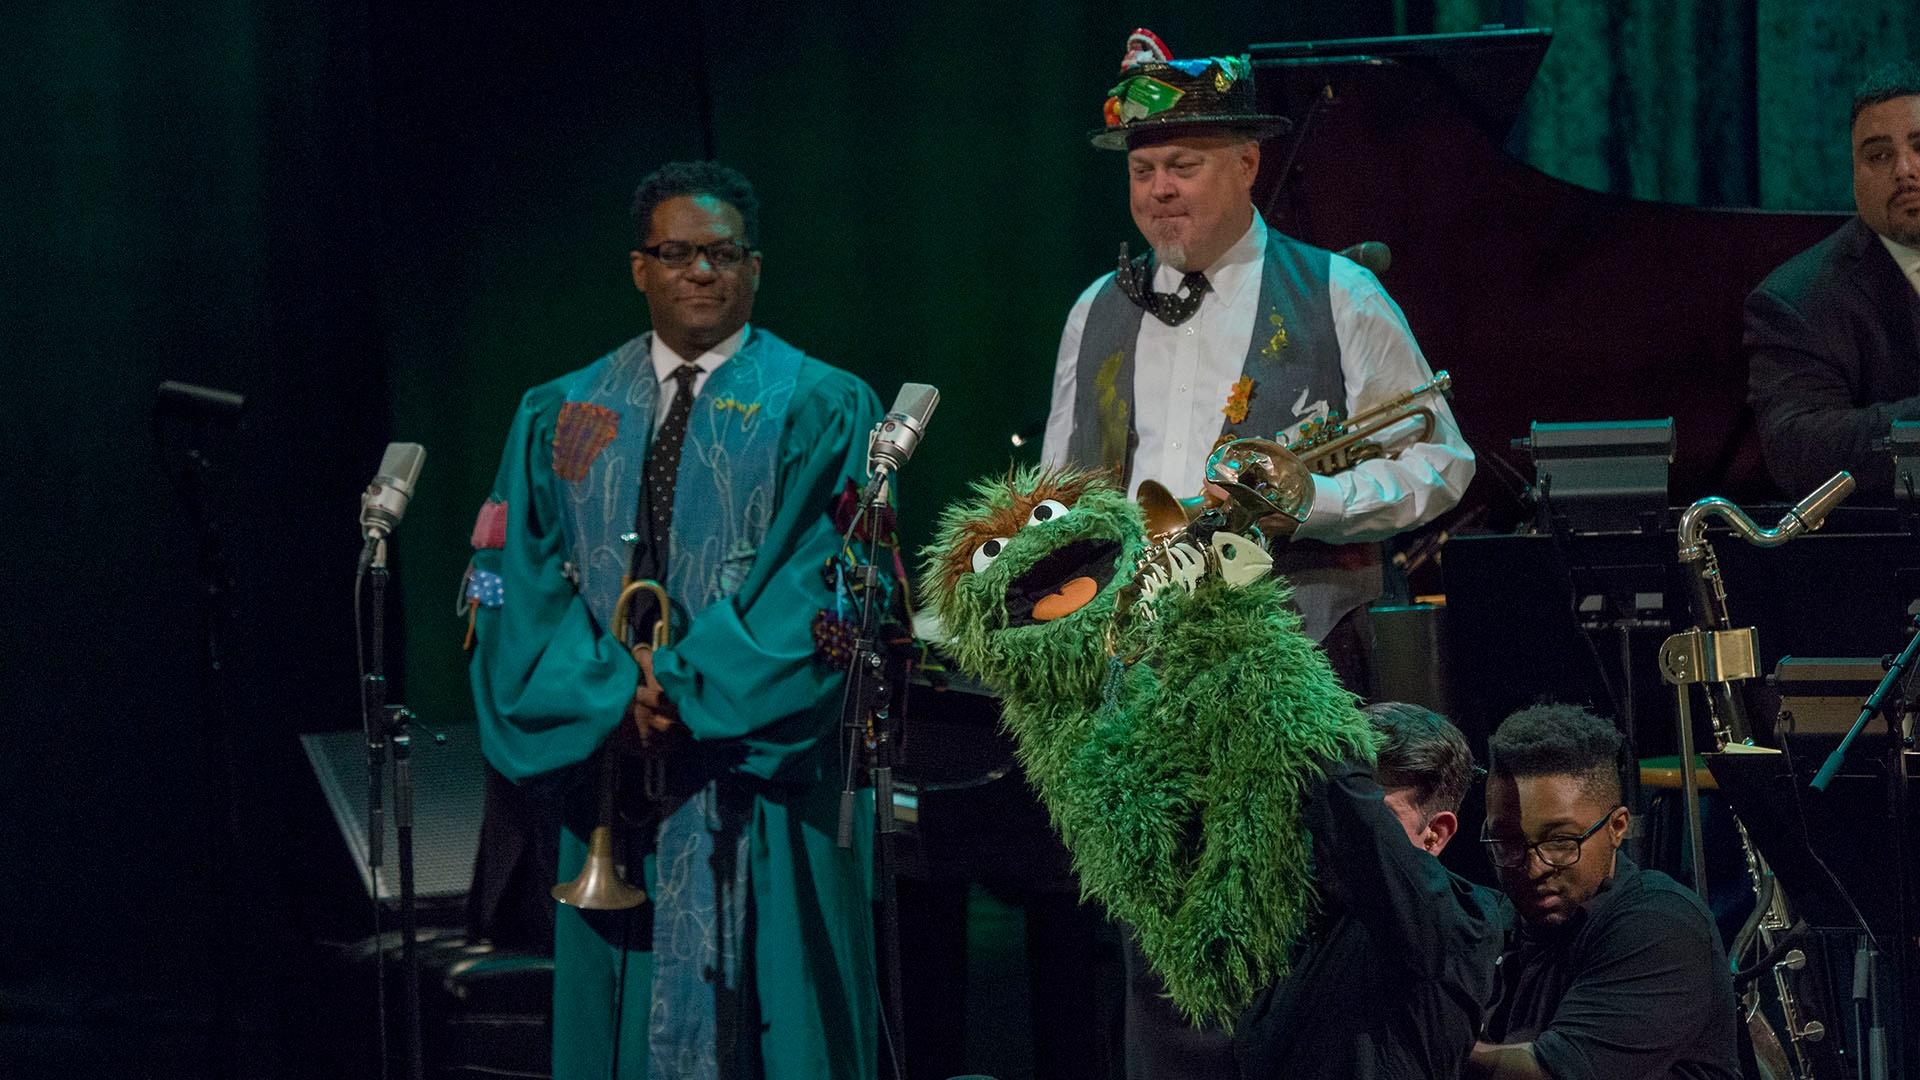 Image of Oscar the Grouch singing "One of These Things" with Marcus Printup and Kenny Rampton.